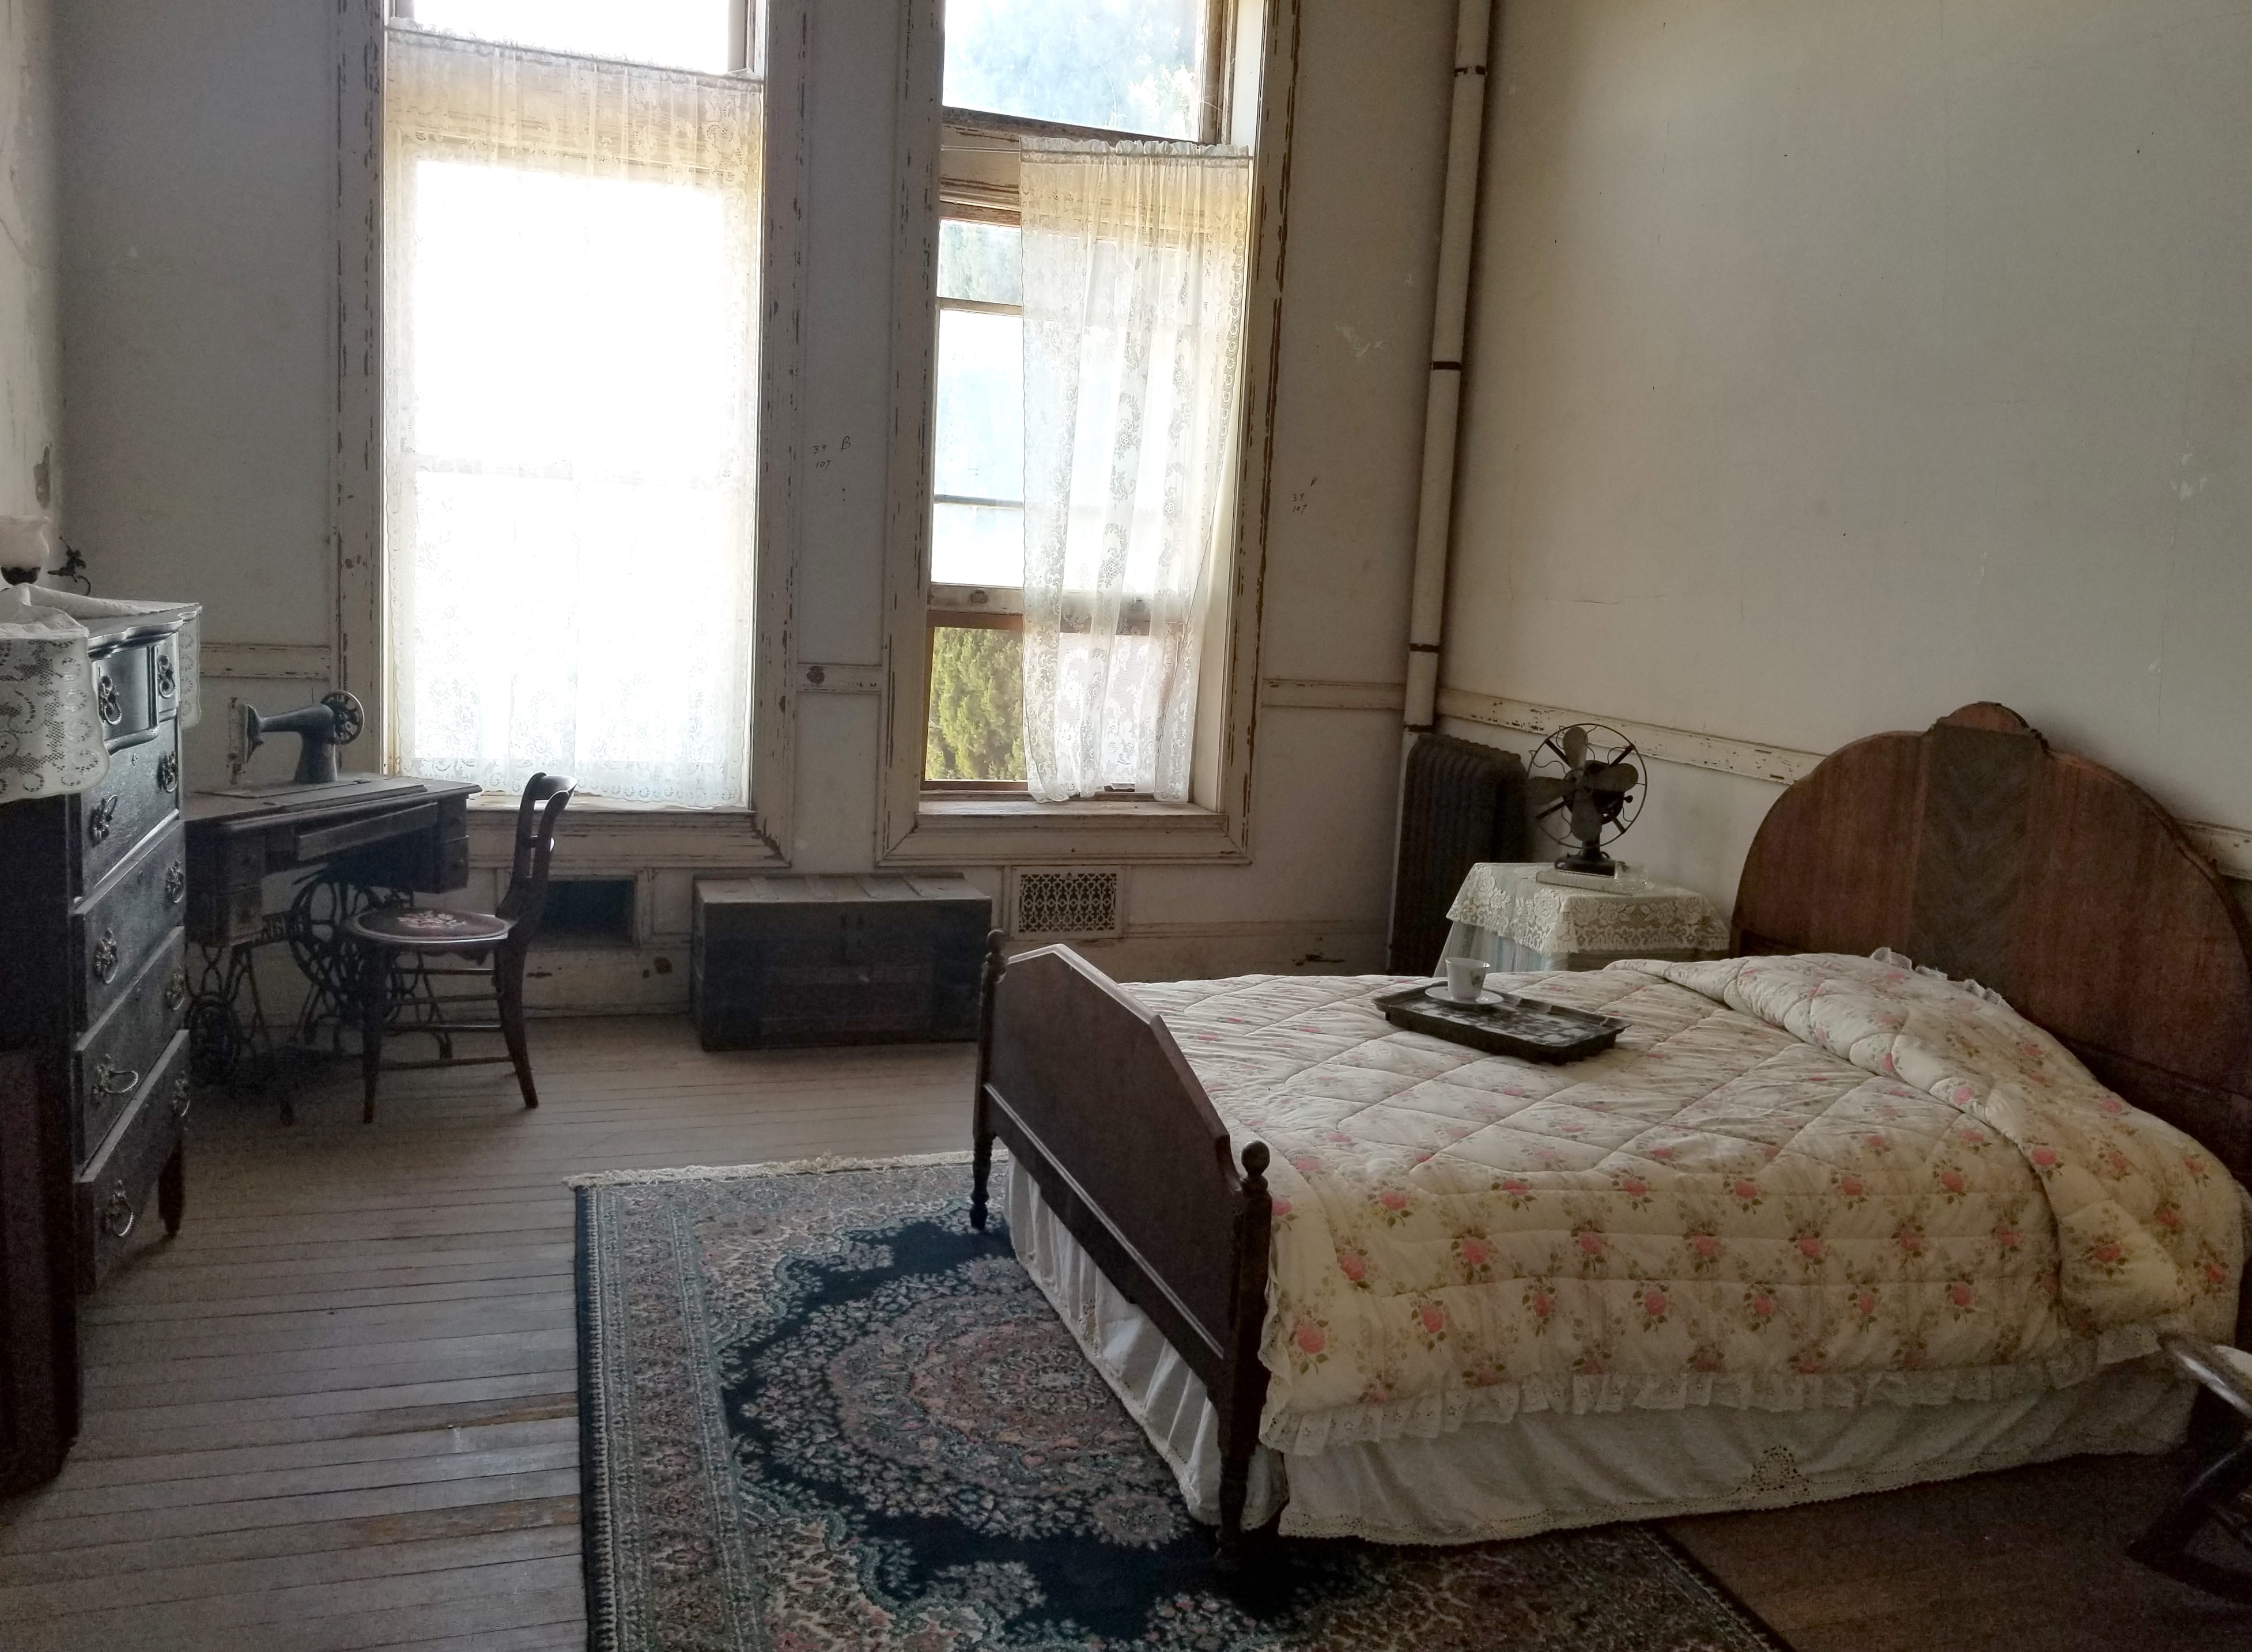 apartment with antique bed, sewing desk, dresser, chest, and rug